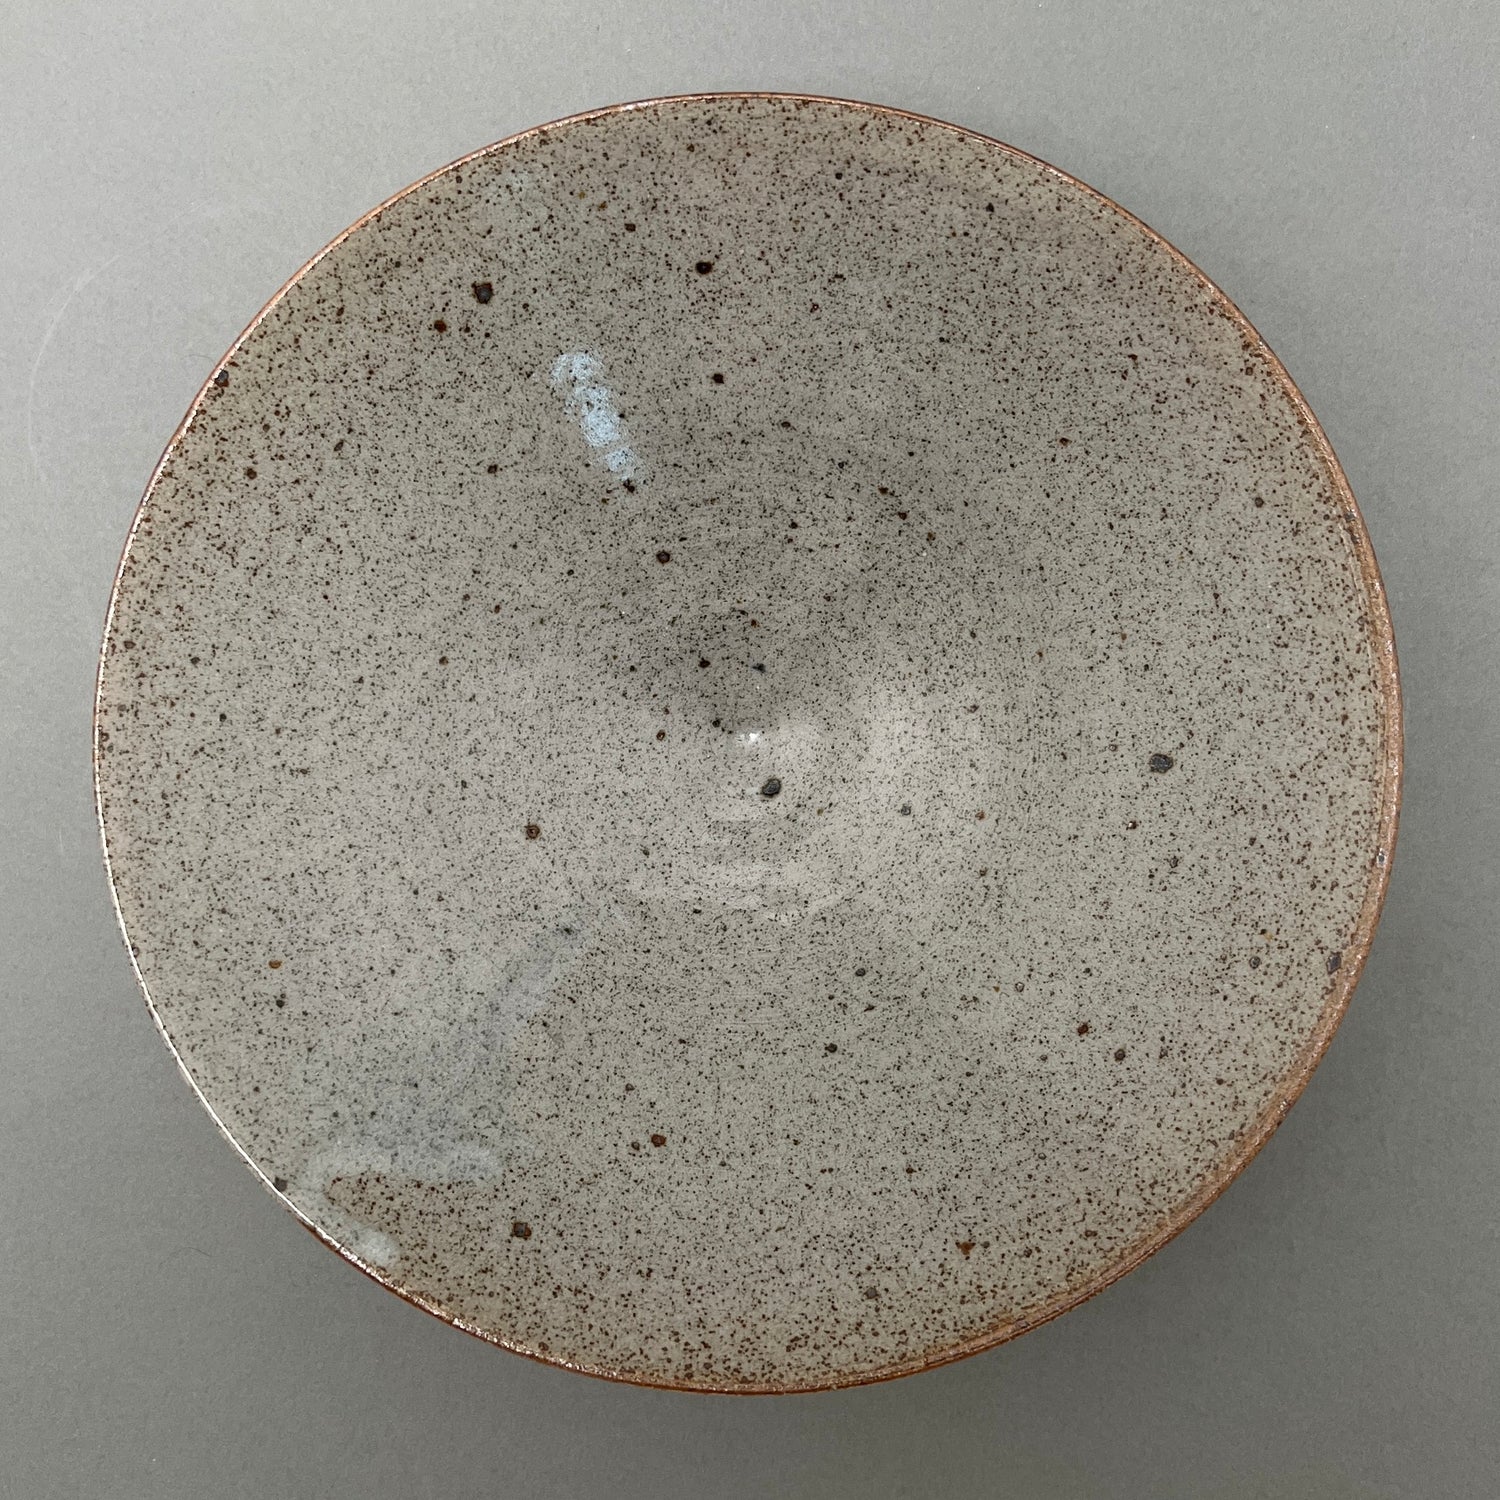 A gray shallow ceramic bowl standing on a gray background